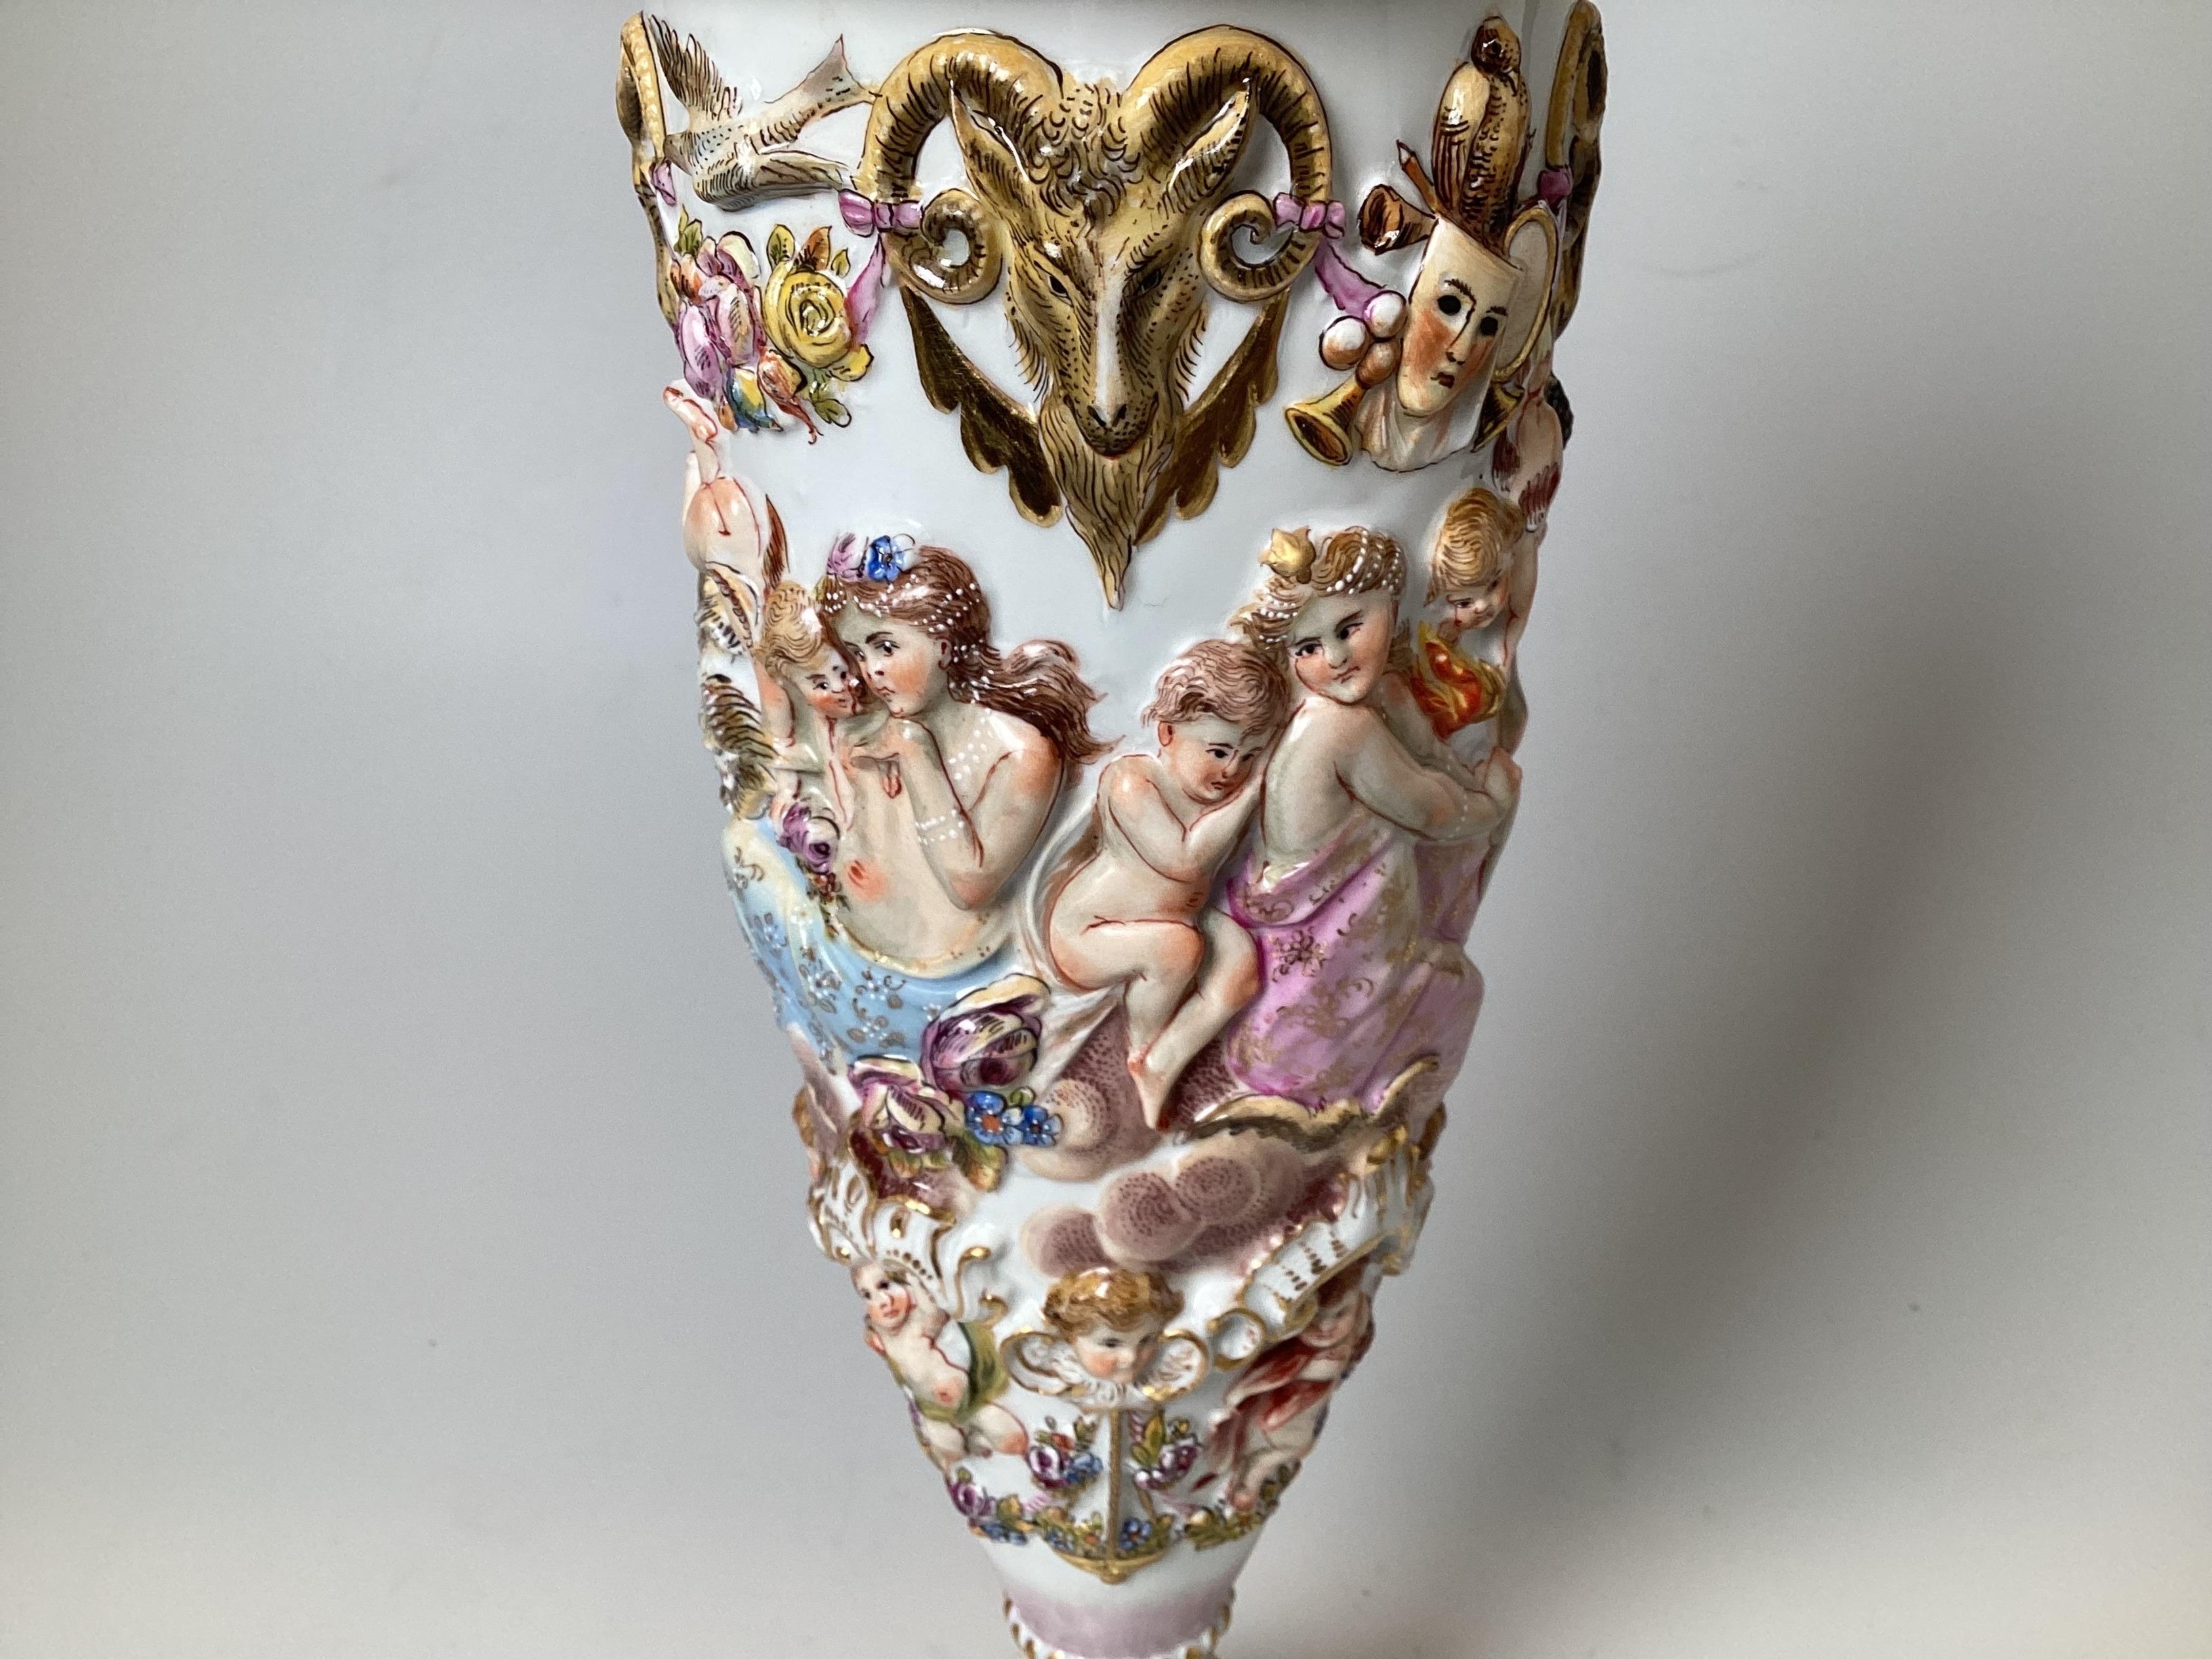 A finely detailed urn with lid, 19th Century Italy.  Made by Copodimonte with the gold Naples mark on bottom.  18.25 inches tall with lid